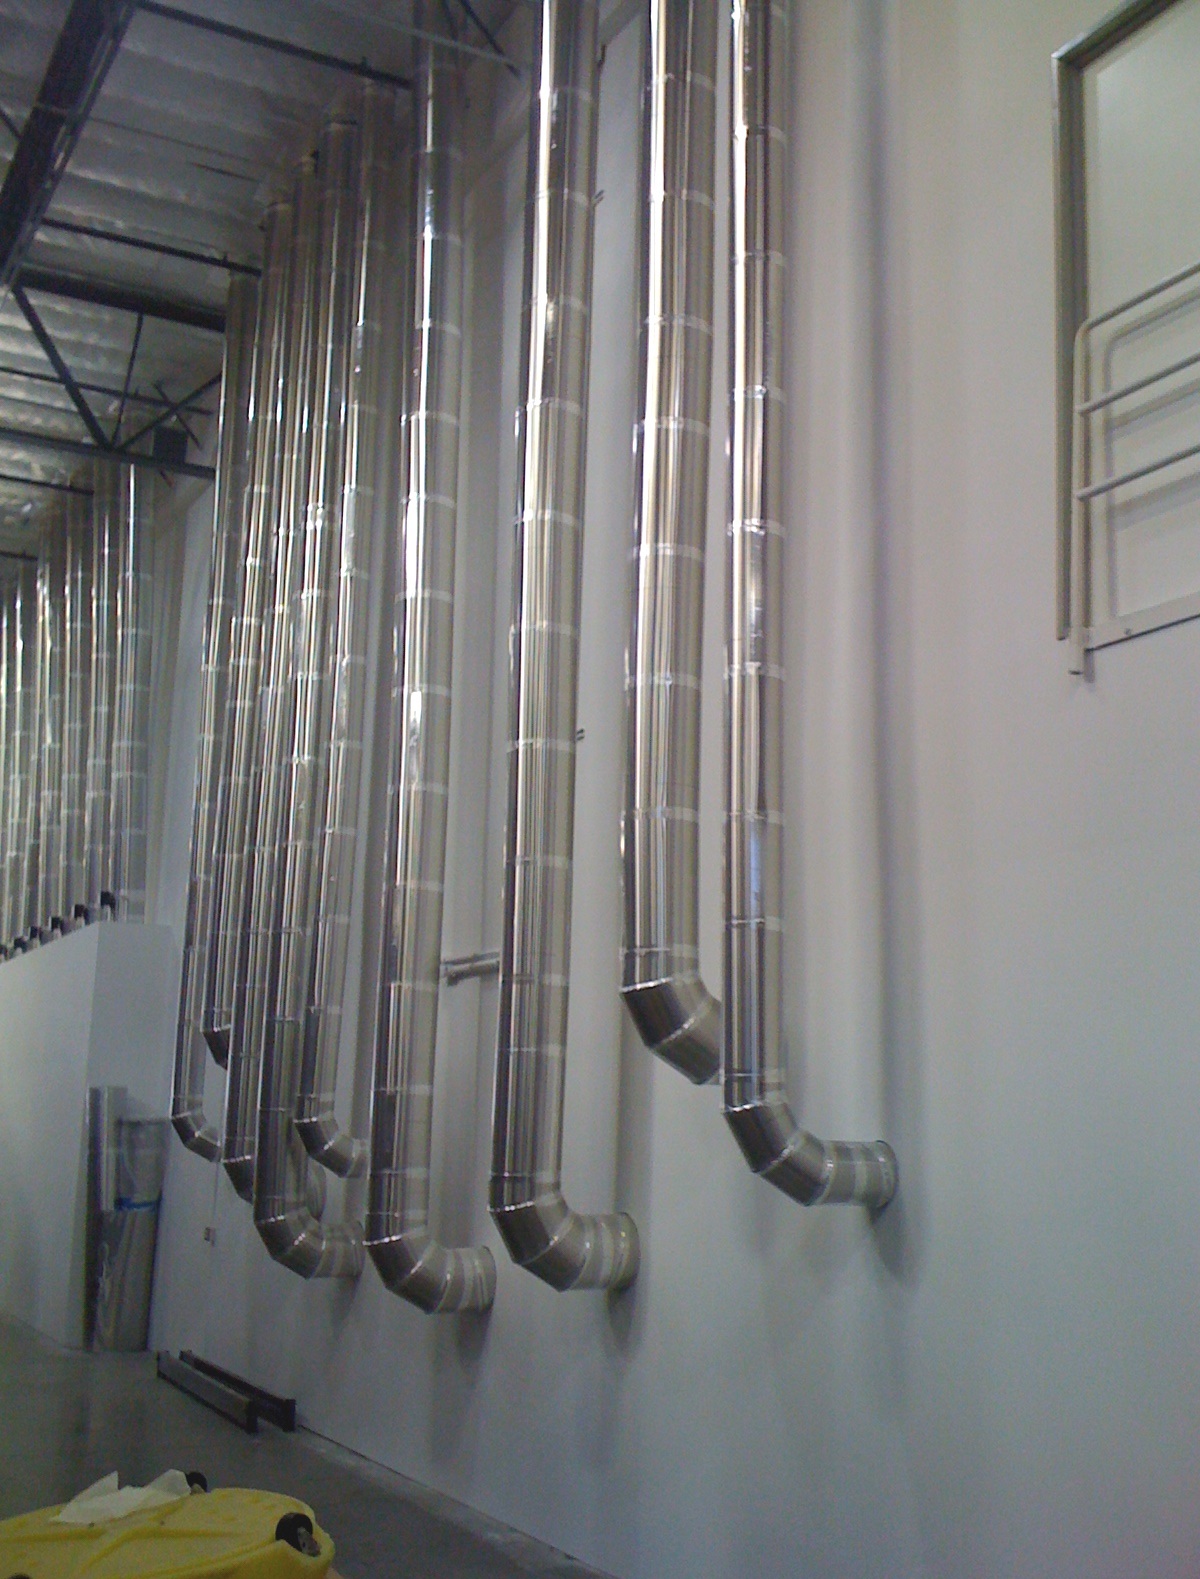 SolaDot tubing on other side of the wall